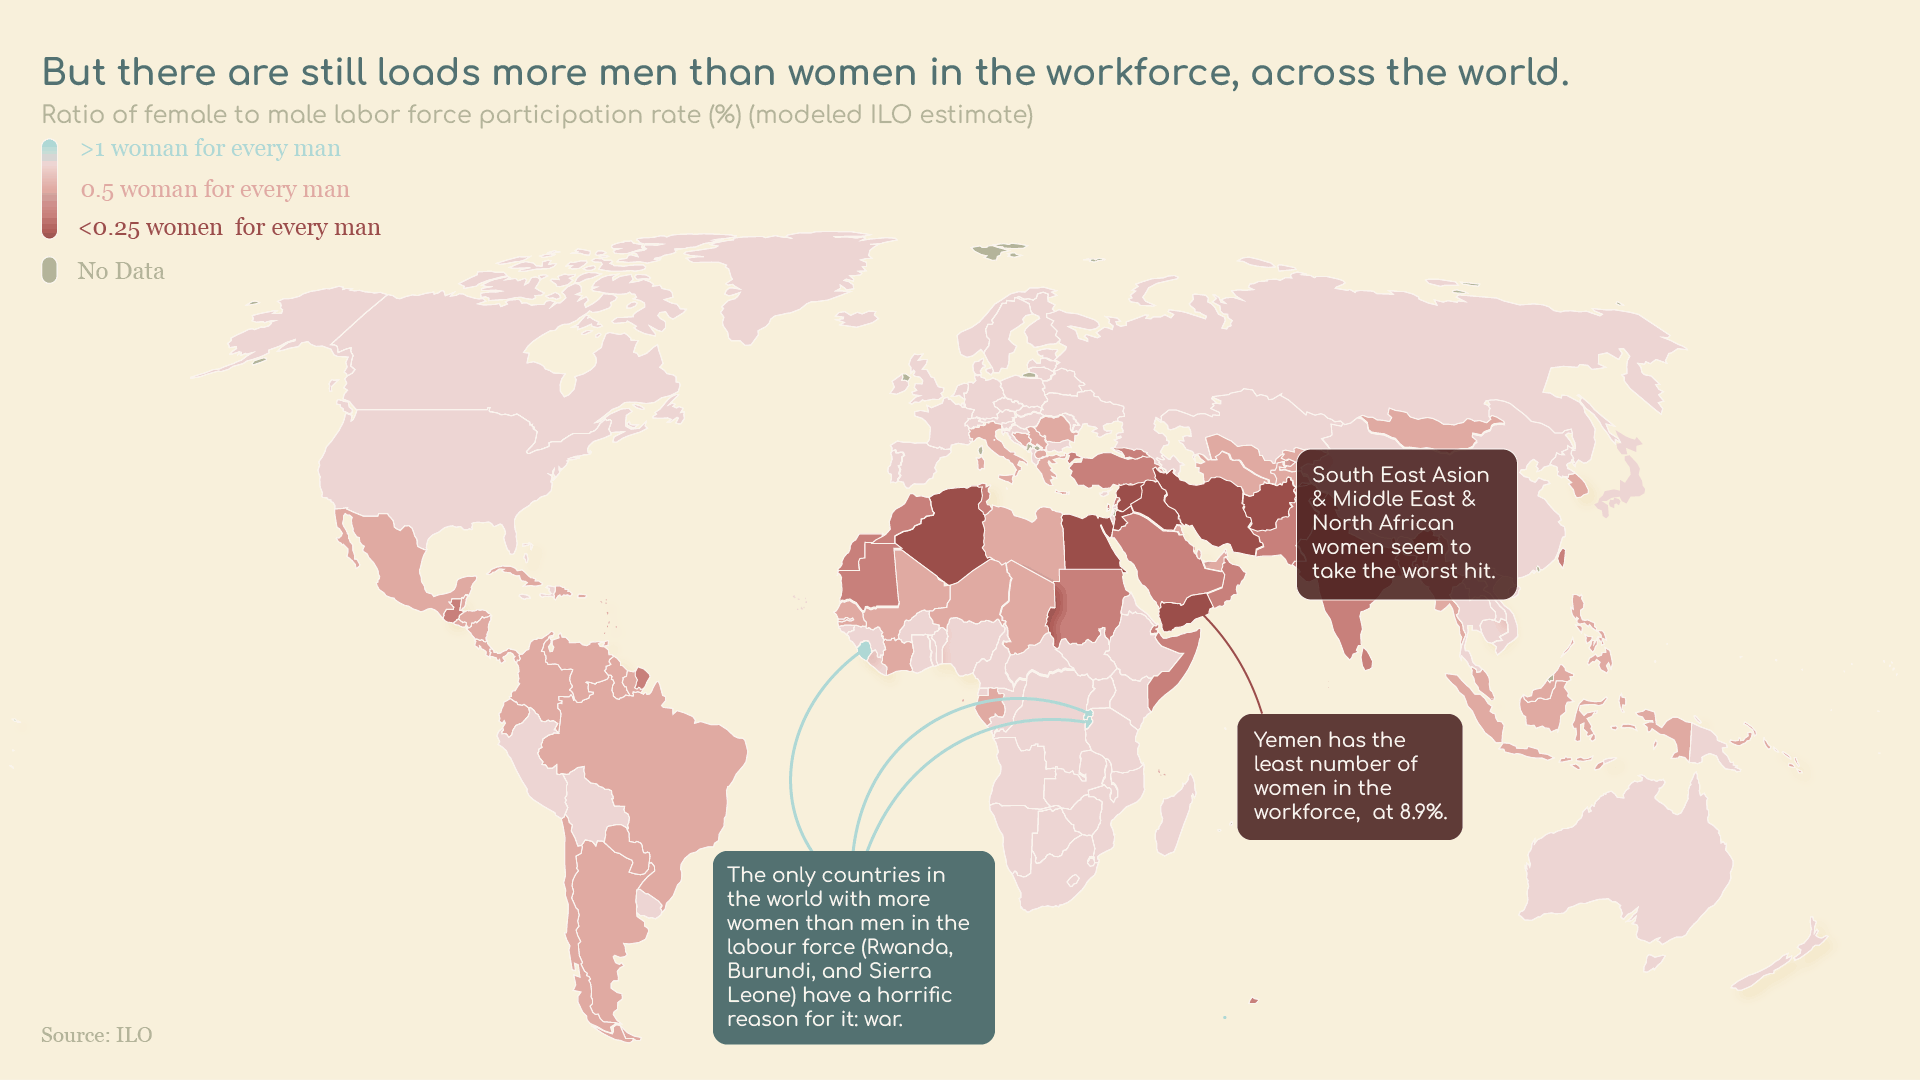 But there are still loads more men than women in the workforce, across the world.
Ratio of female to male labour force participation rate (%) (modelled ILO estimate